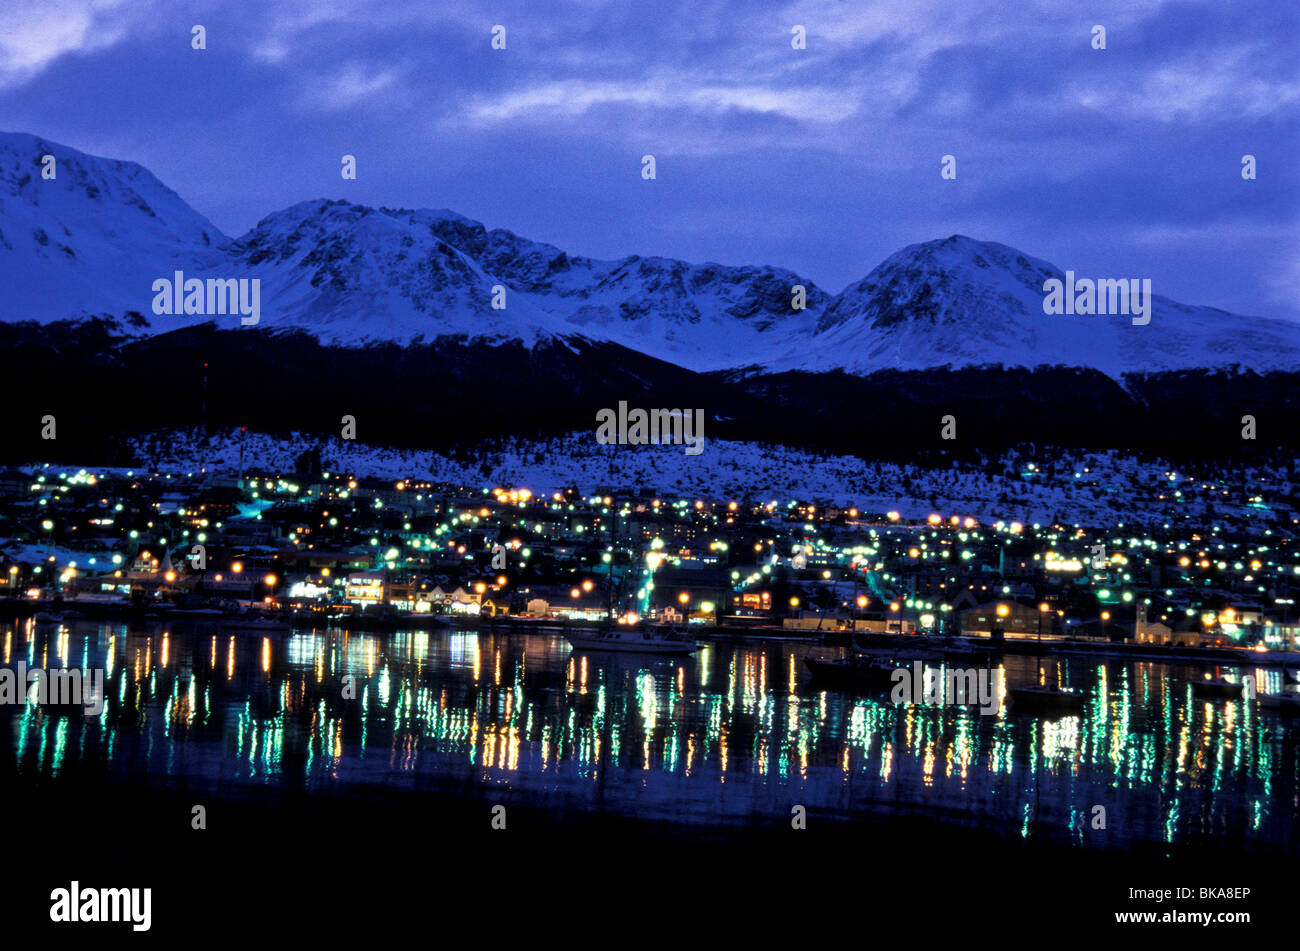 The city of Ushuaia (Pop: approx. 40.000) capital of Argentina’s southernmost province, Tierra del Fuego. Stock Photo